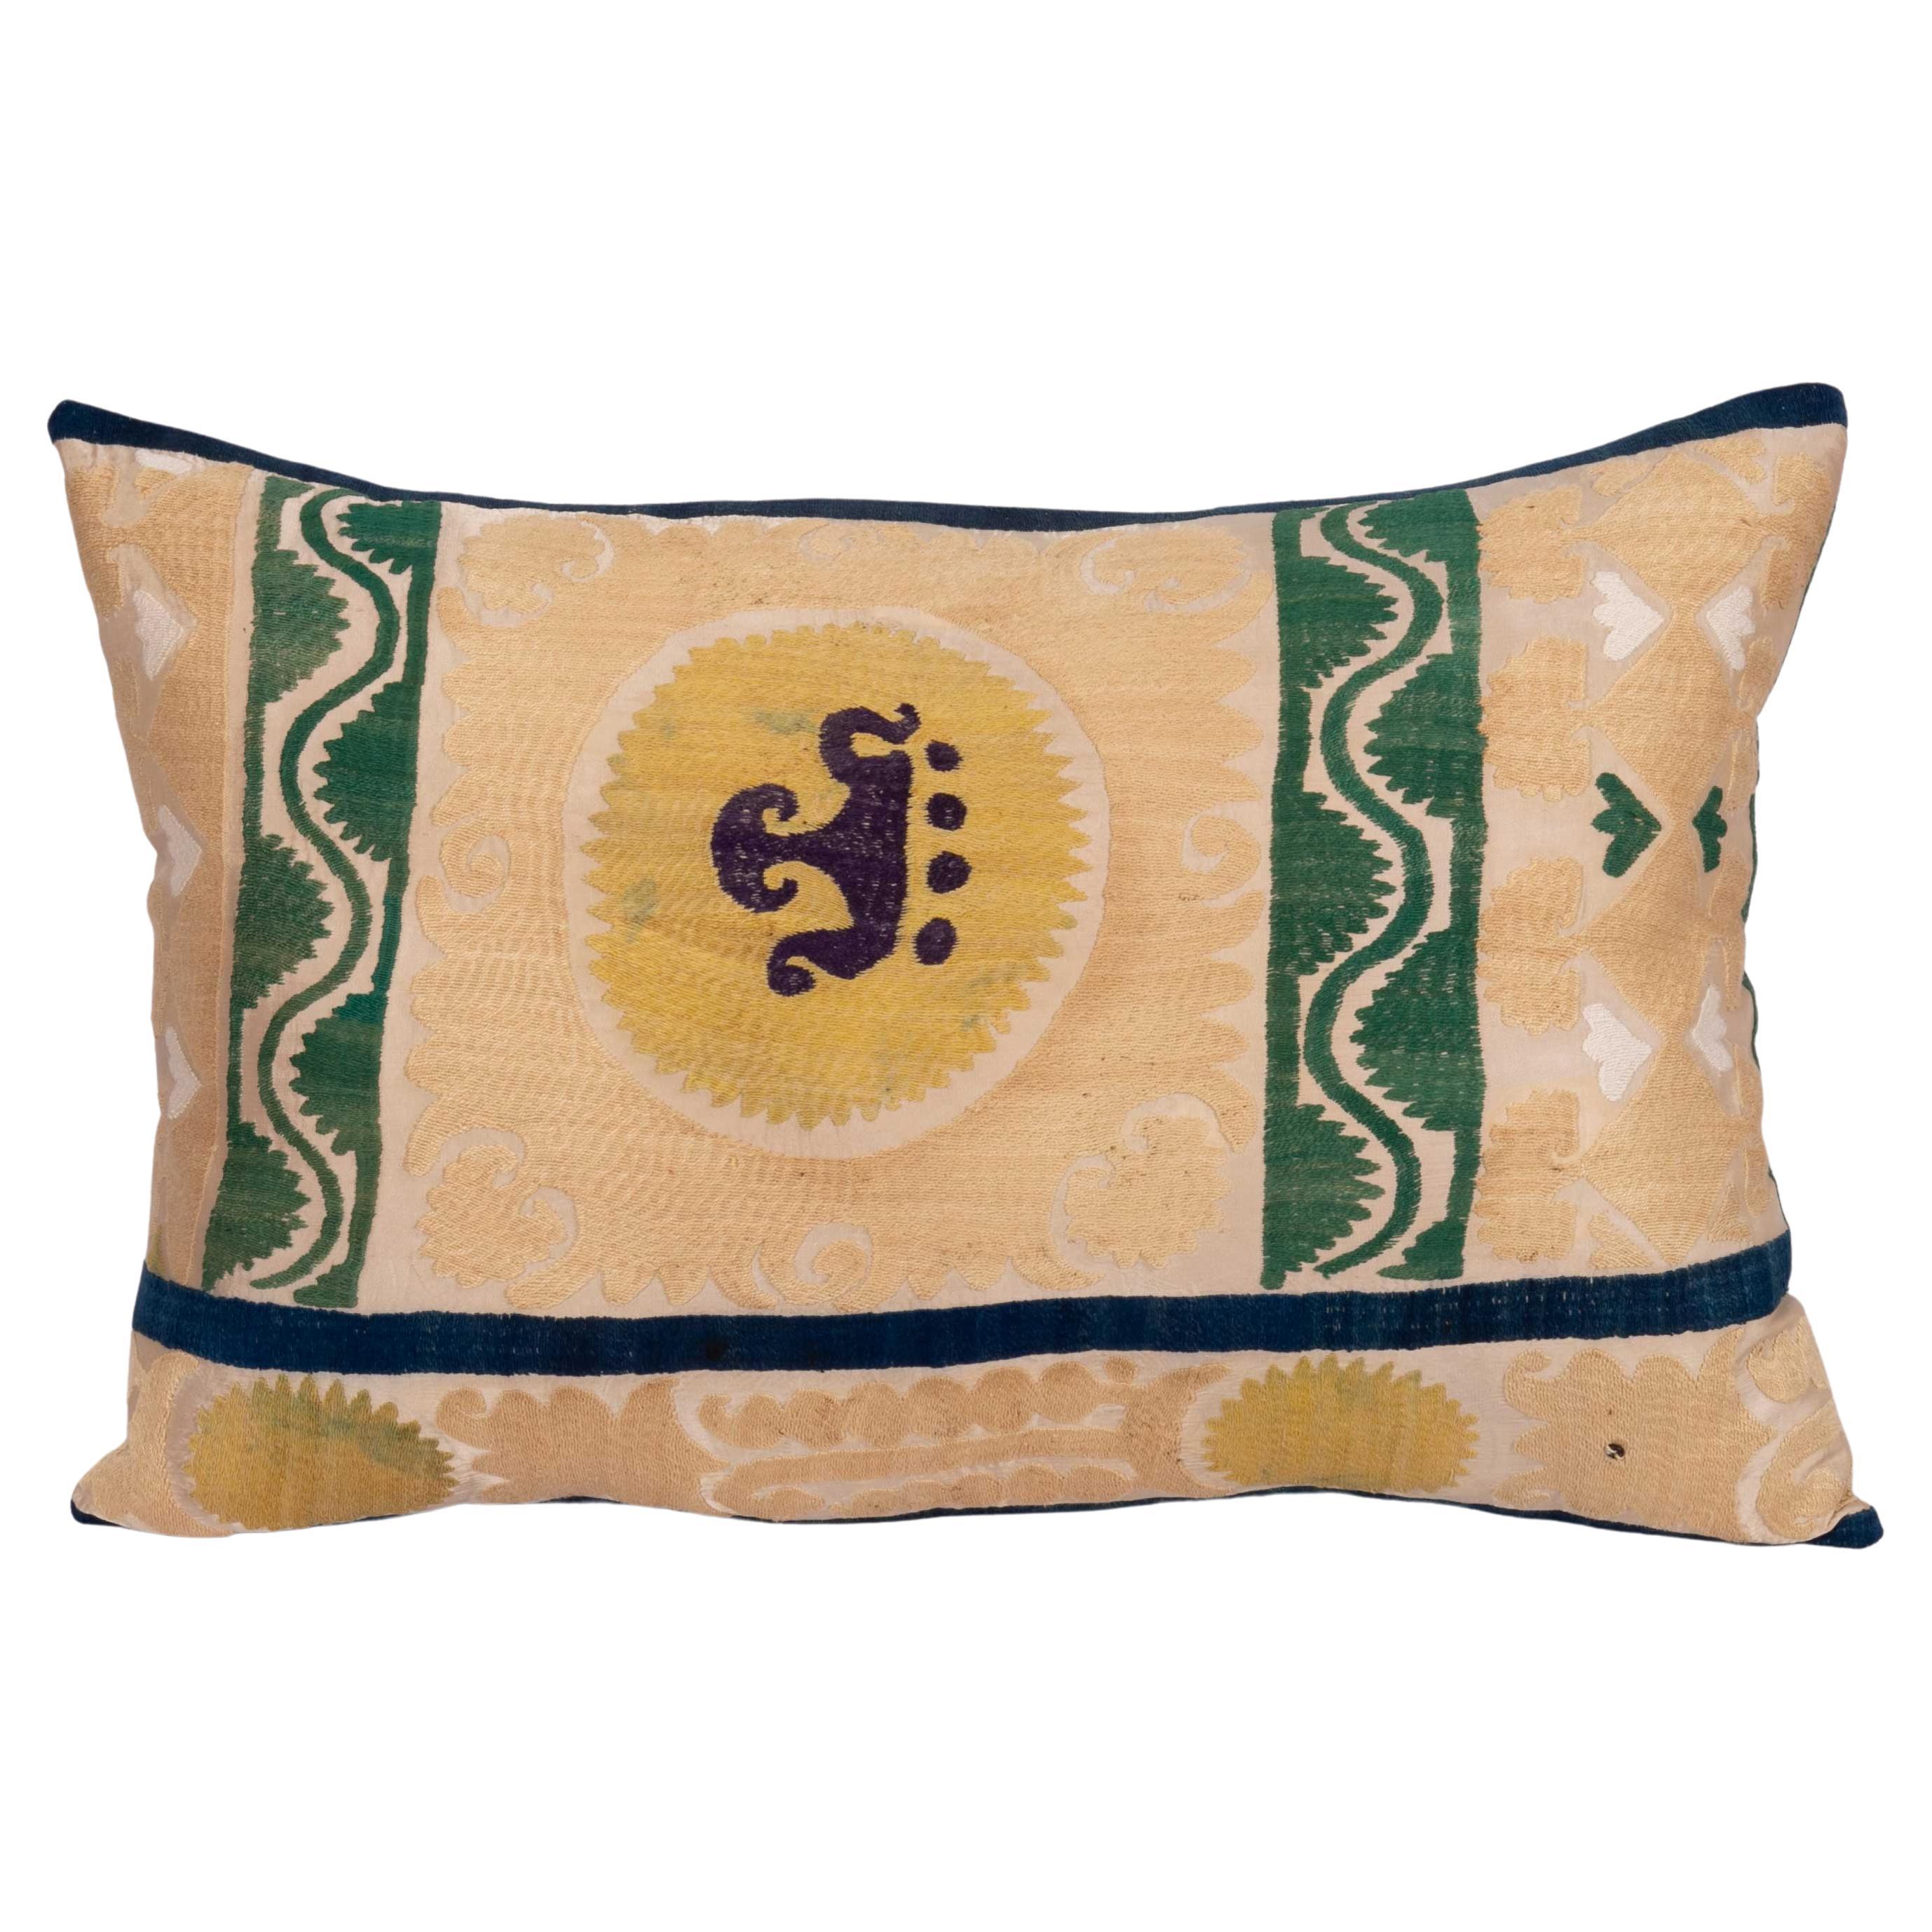 Suzani Pillow Case, Made from a Mid 20th C. Uzbek Suzani